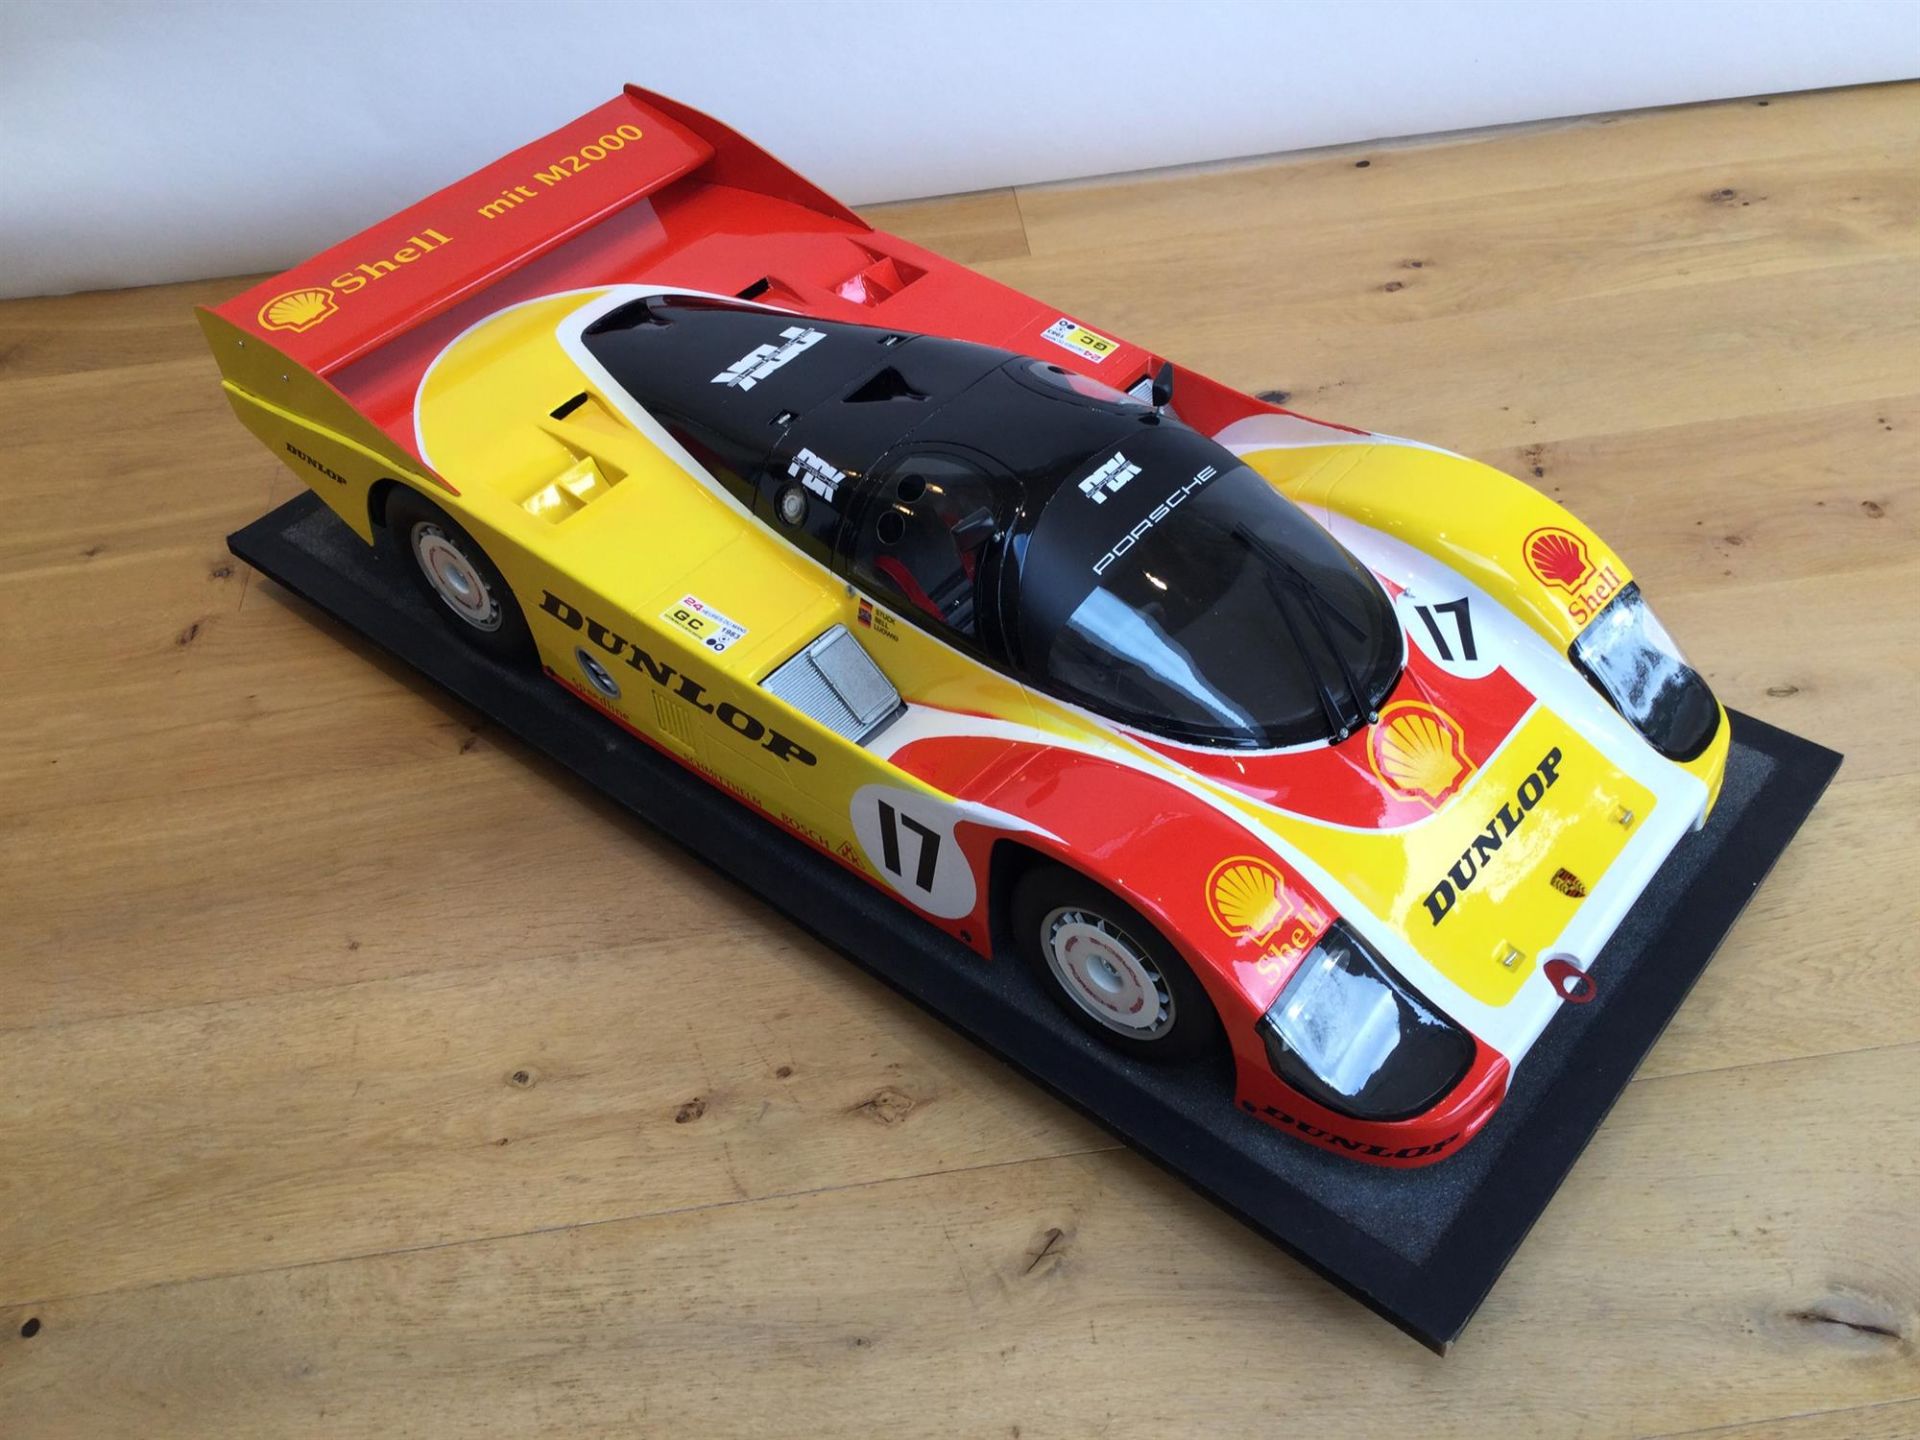 Stunning 1:5th Scale Dunlop-Shell Porsche 956 by Javan Smith - Image 9 of 10